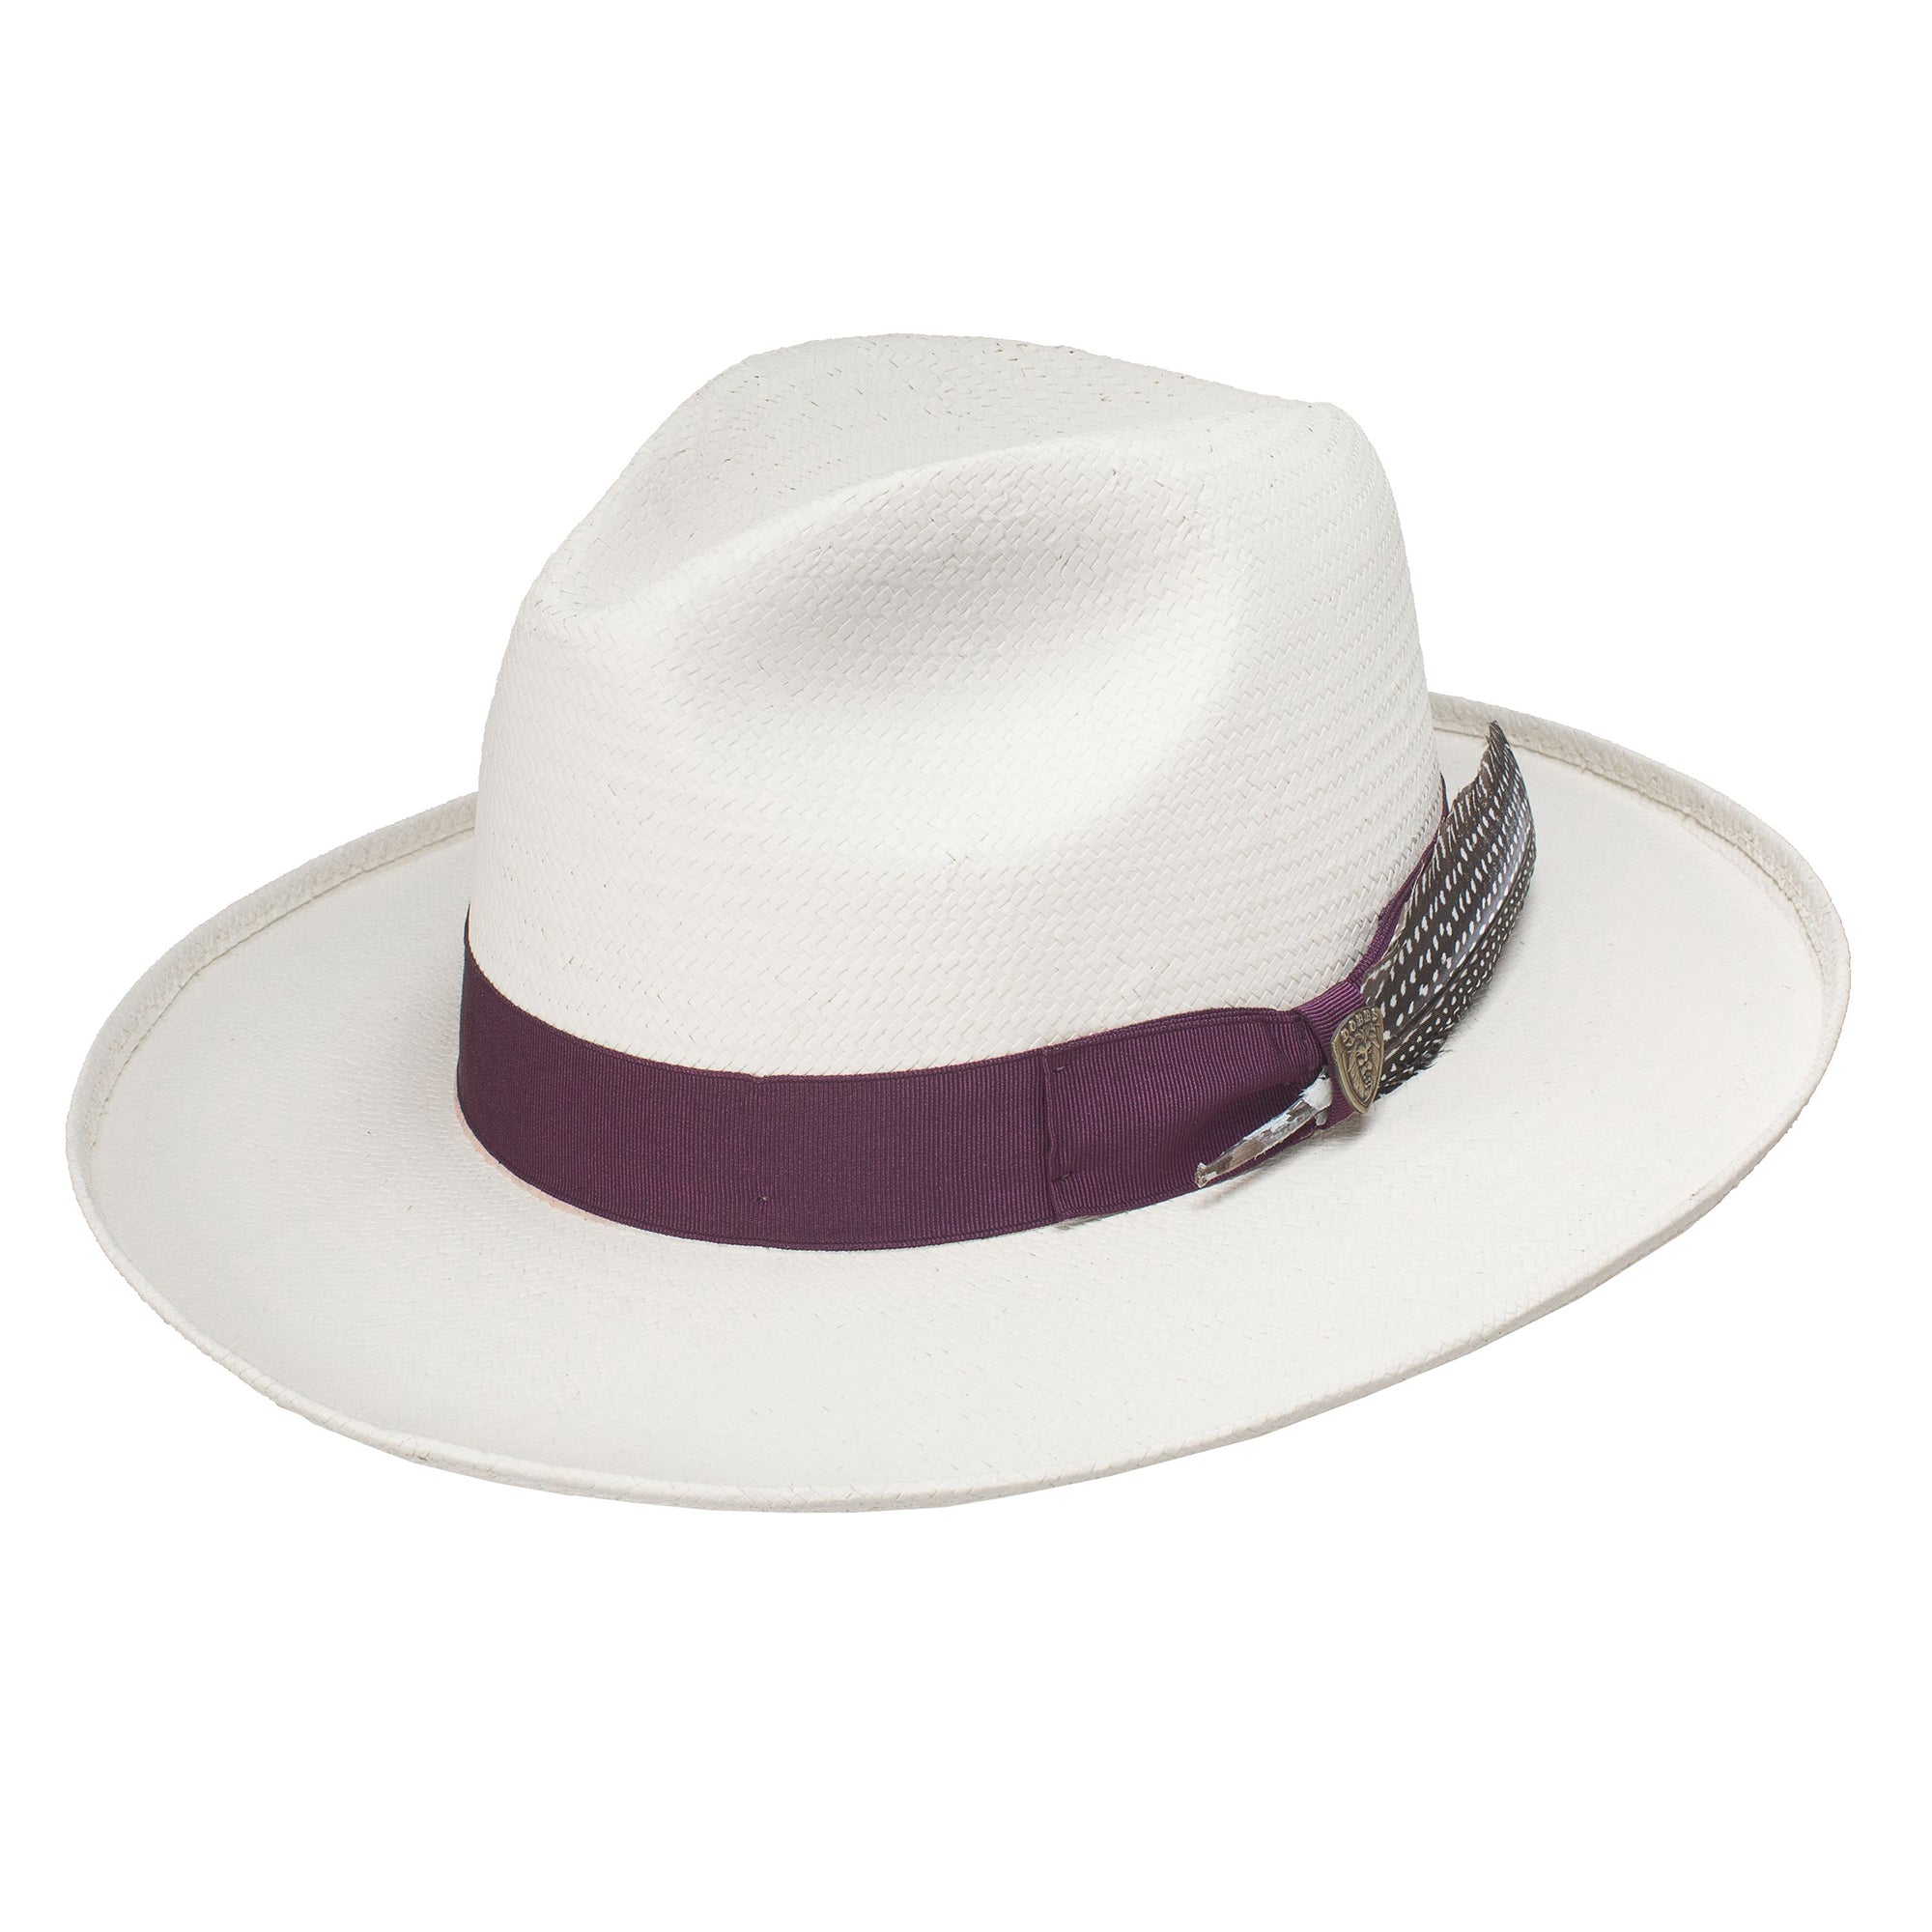 Dobbs Arlo Shantung Toyo Straw Hat with Feather